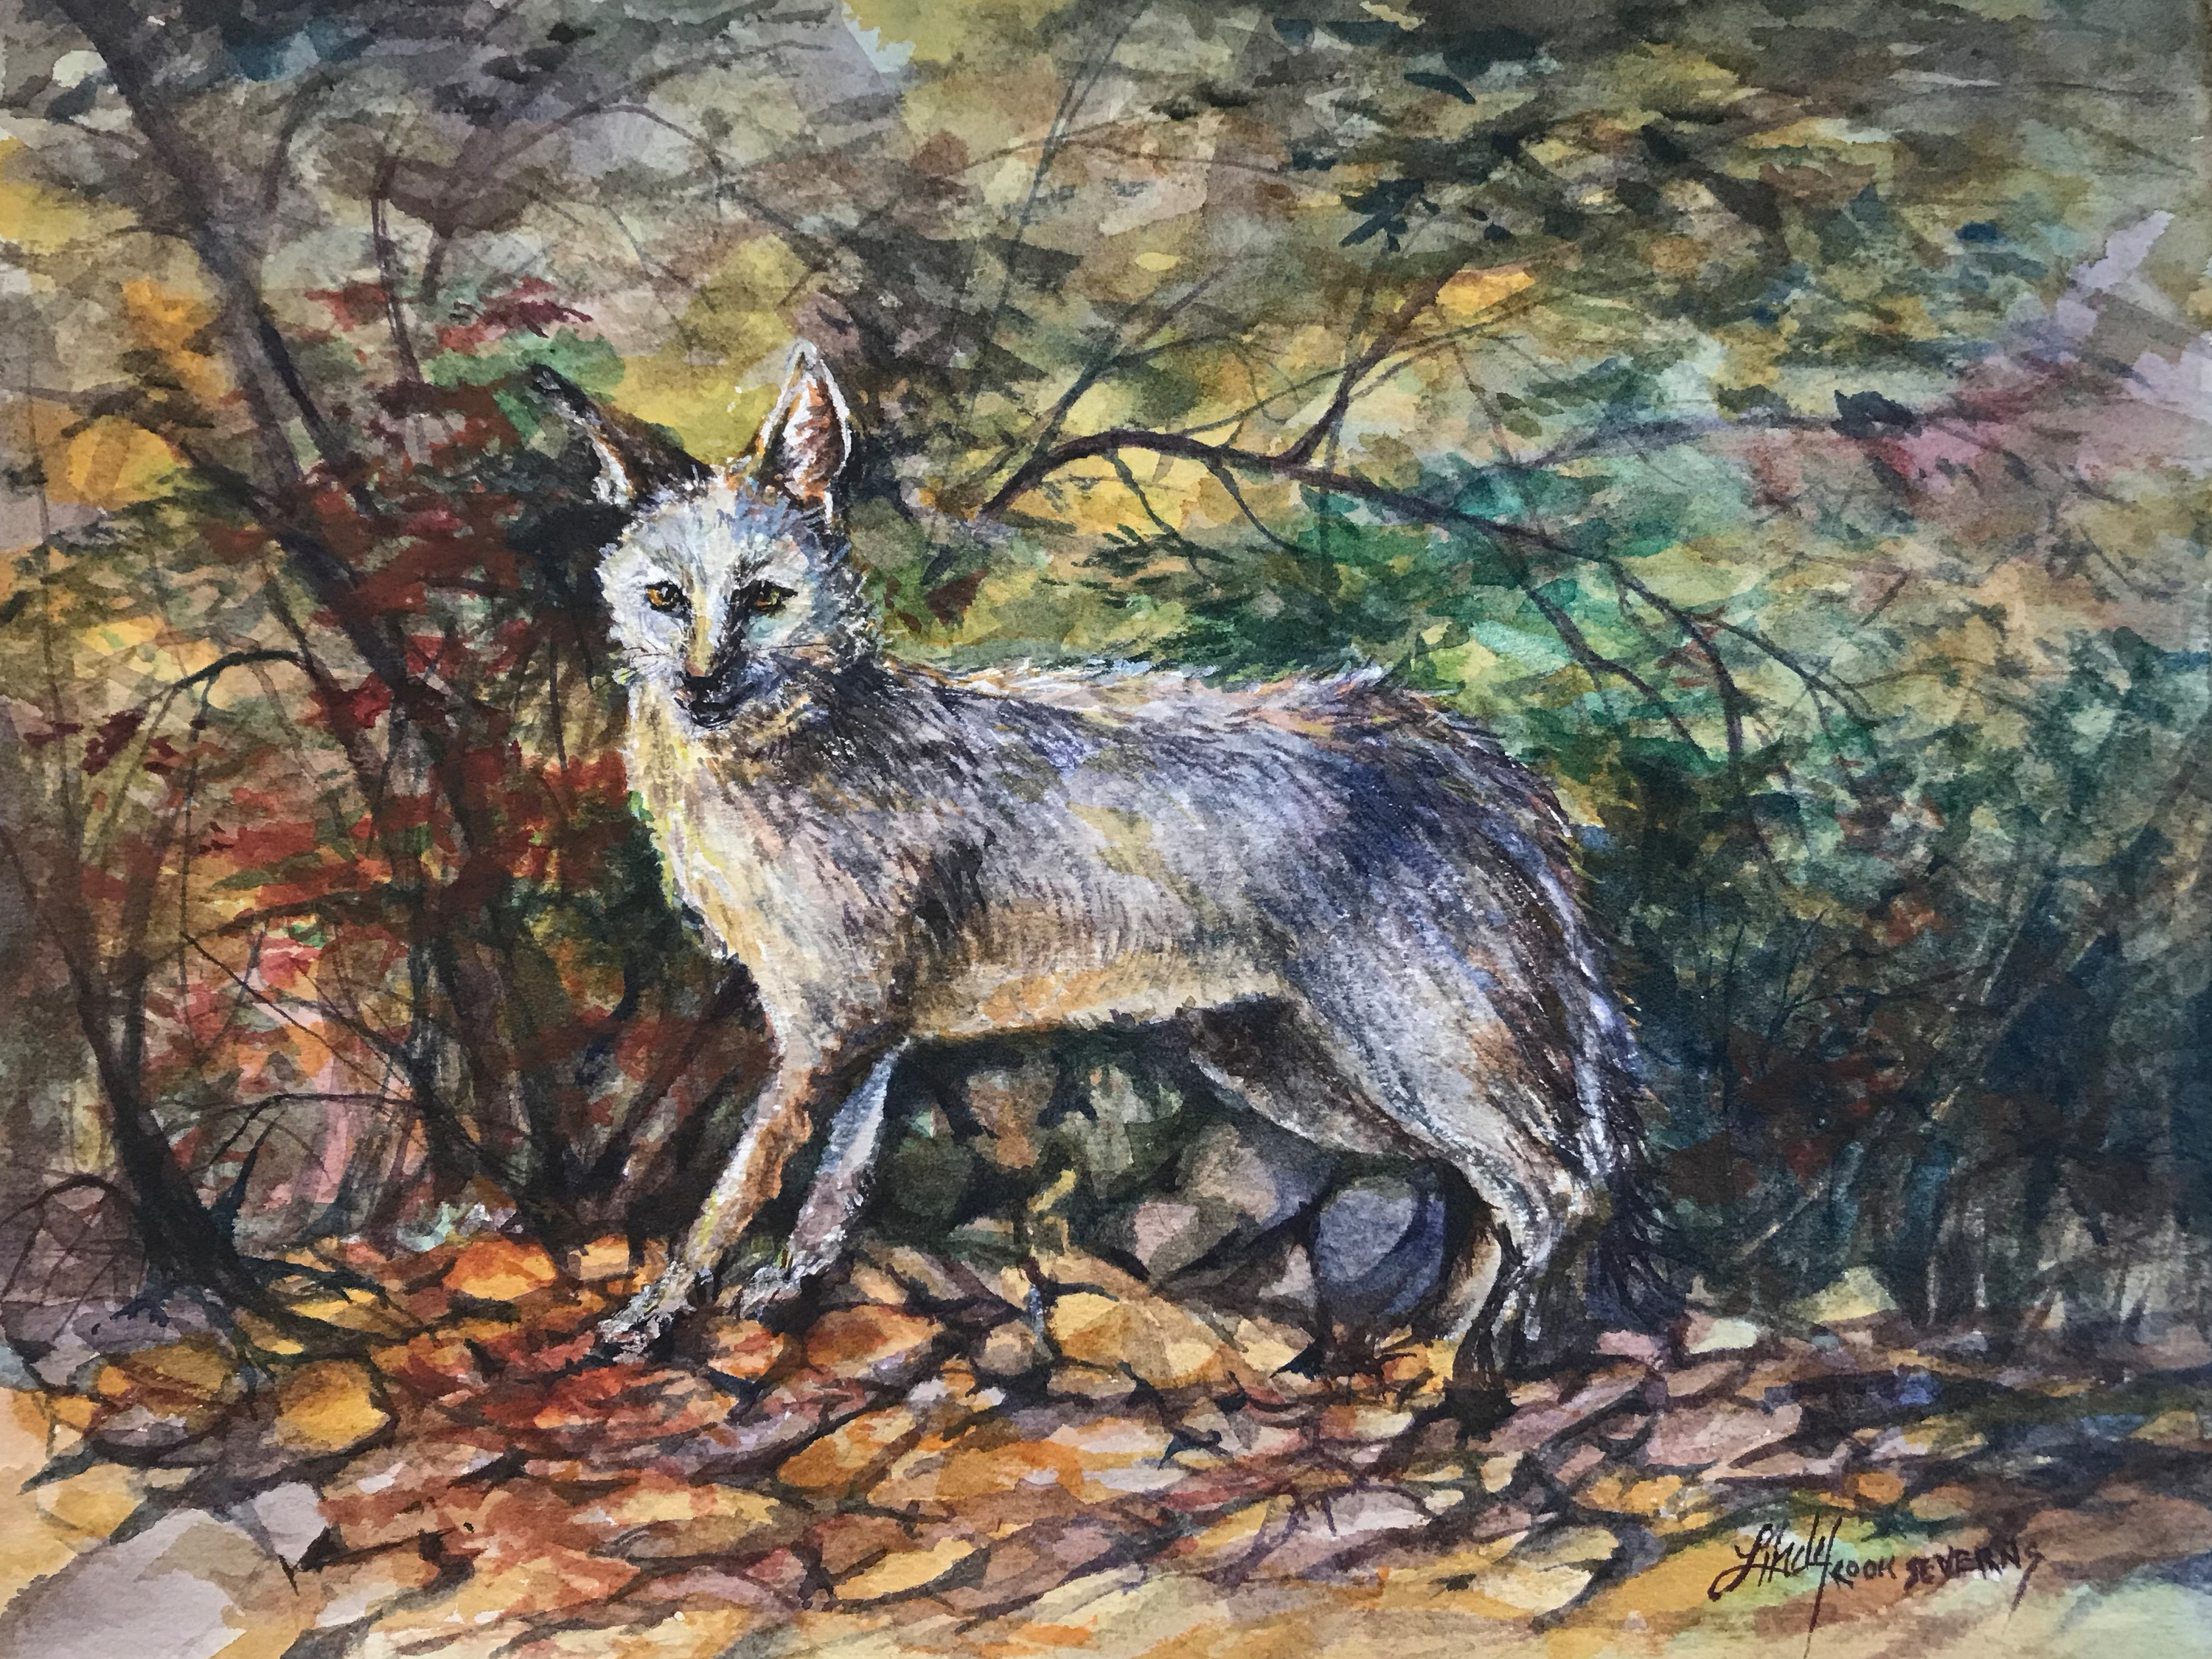 Fox fall 8x10 watercolor lindy cook severns zw3br1